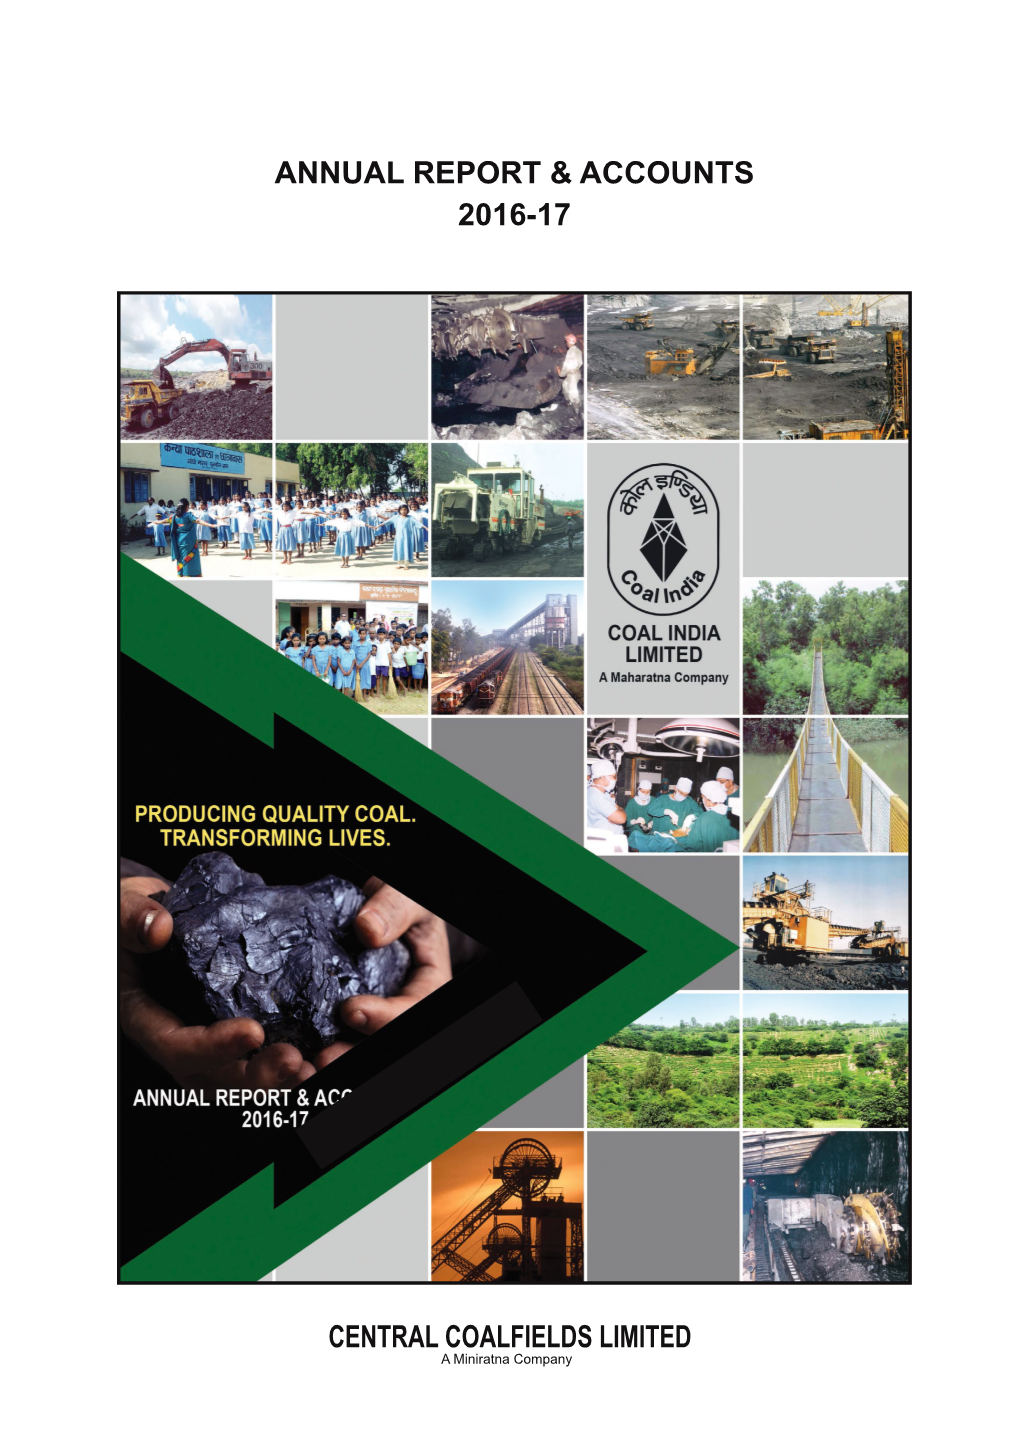 CENTRAL COALFIELDS Limited Annual Report & Accounts